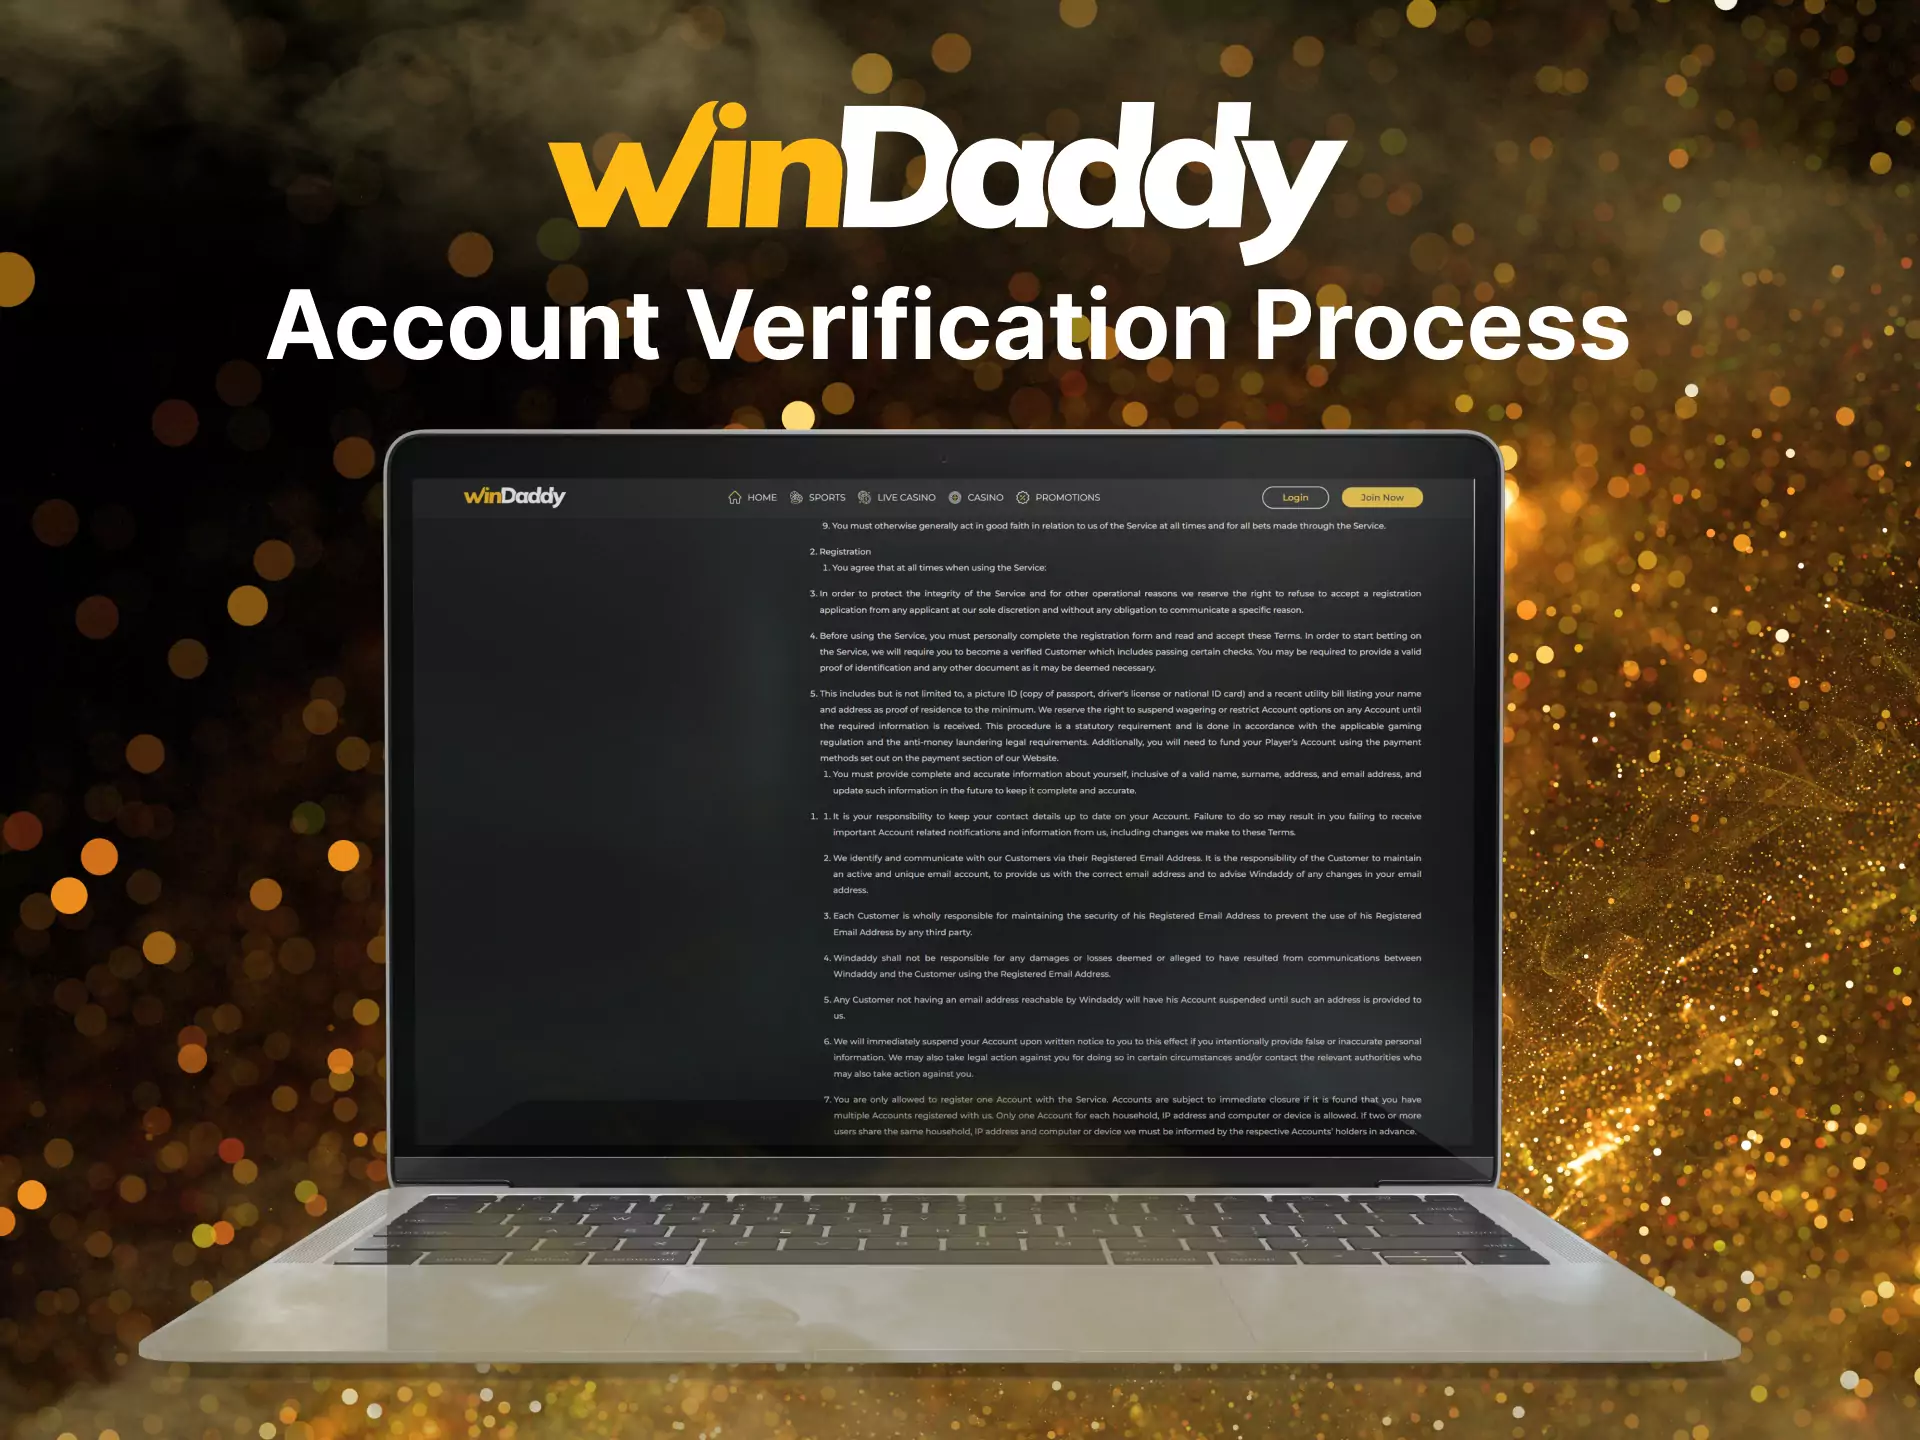 Use this instruction to verify your identity on the Windaddy website.